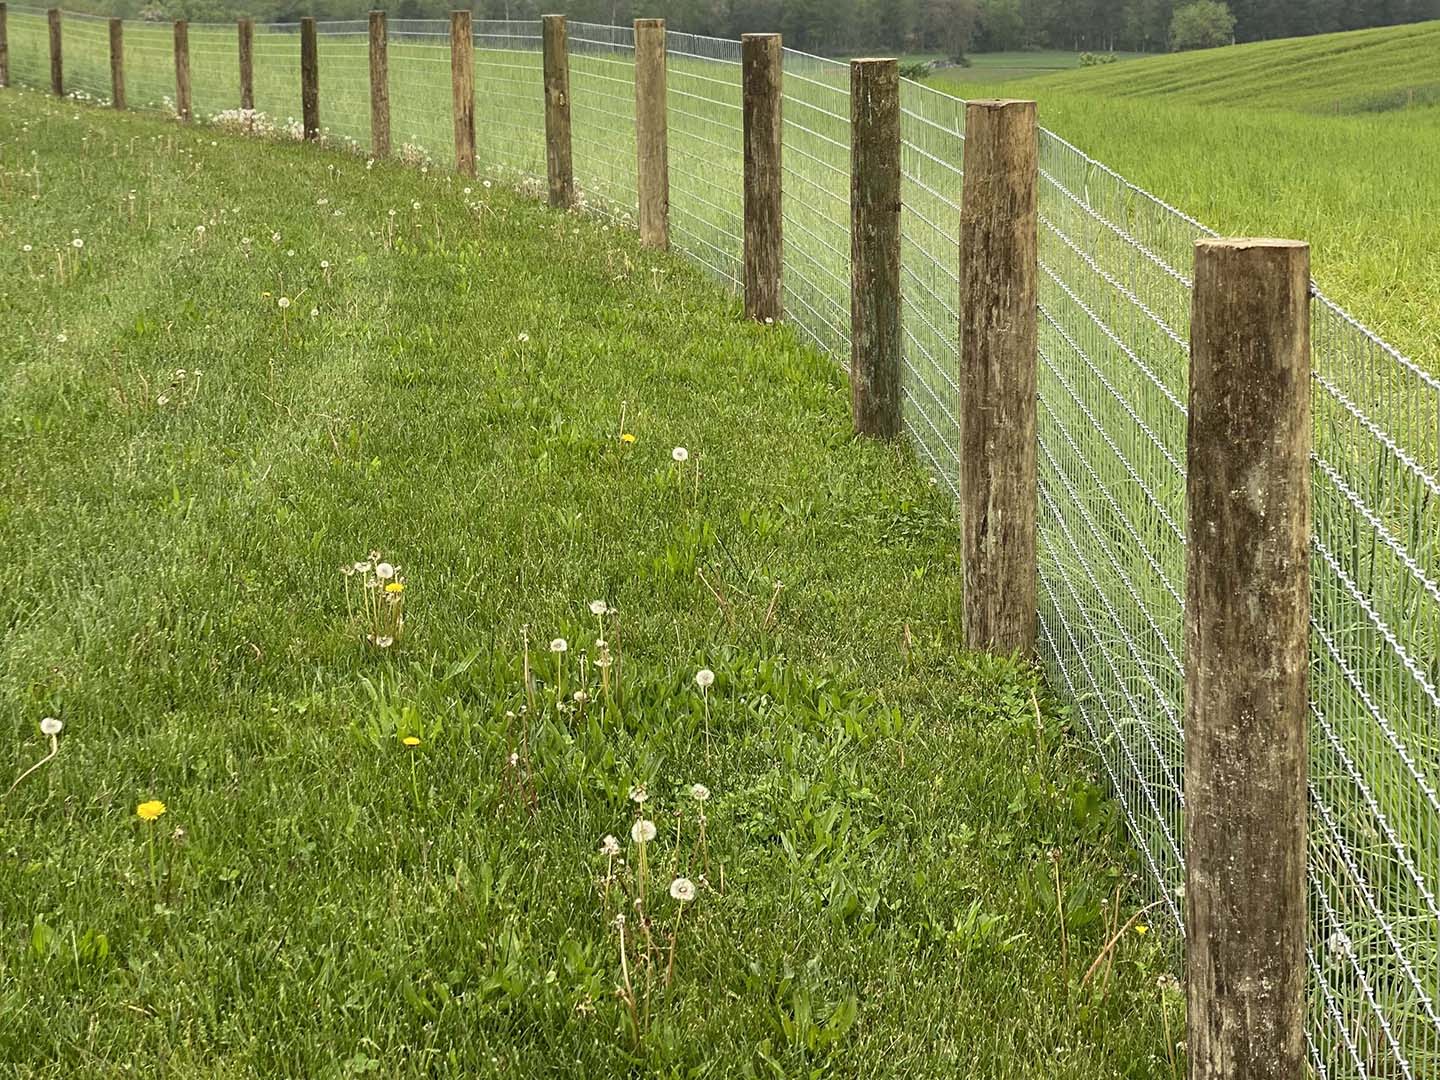 Hampshire County, West Virginia Fence Project Photo